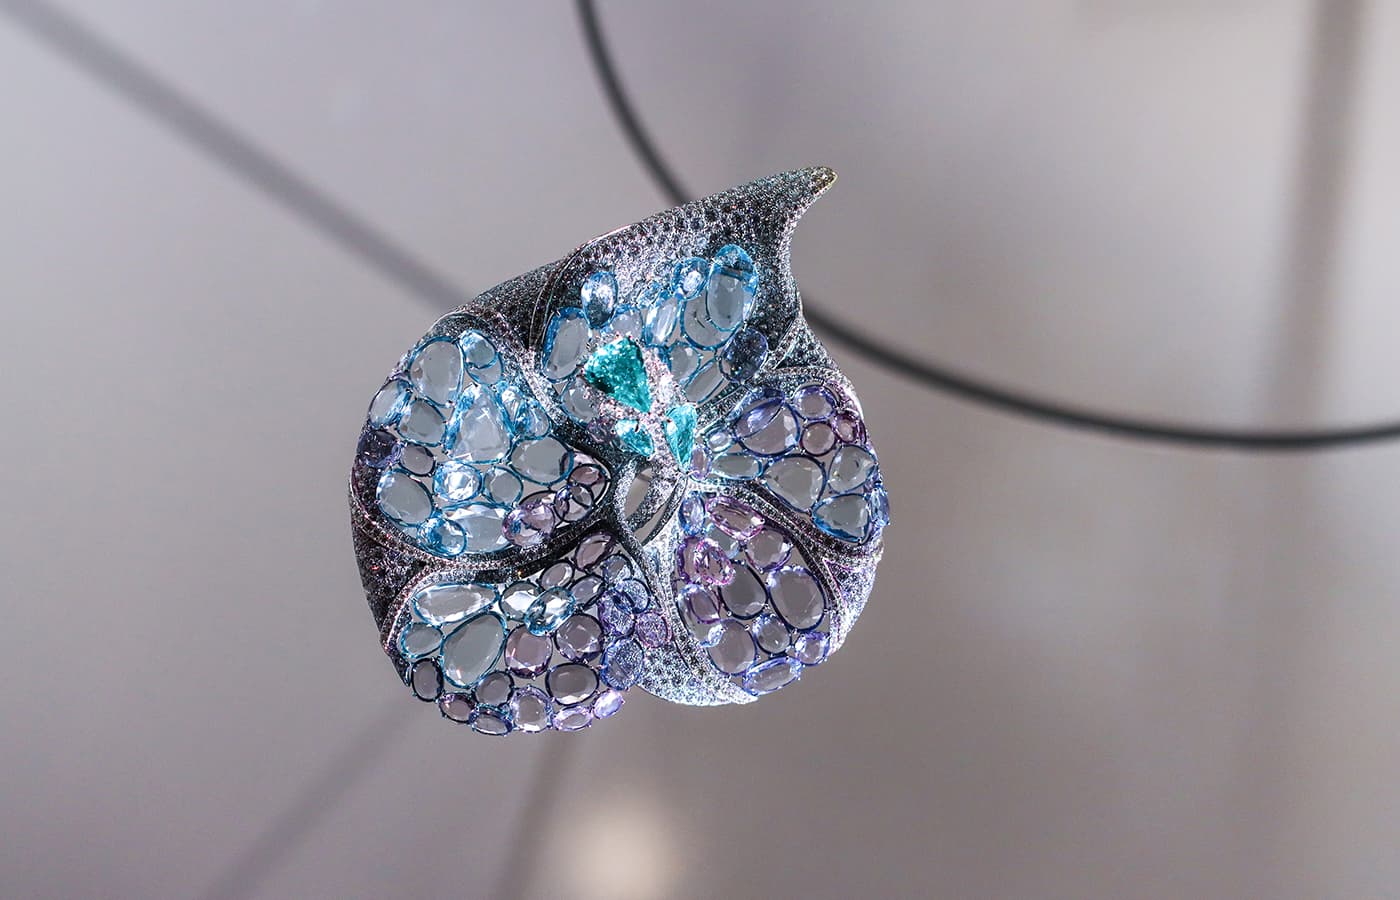 Feng J 'Blue Anthurium' brooch with Paraiba tourmaline, double rose-cut aquamarine, spinel, sapphire and diamonds in 18k electroplated gold